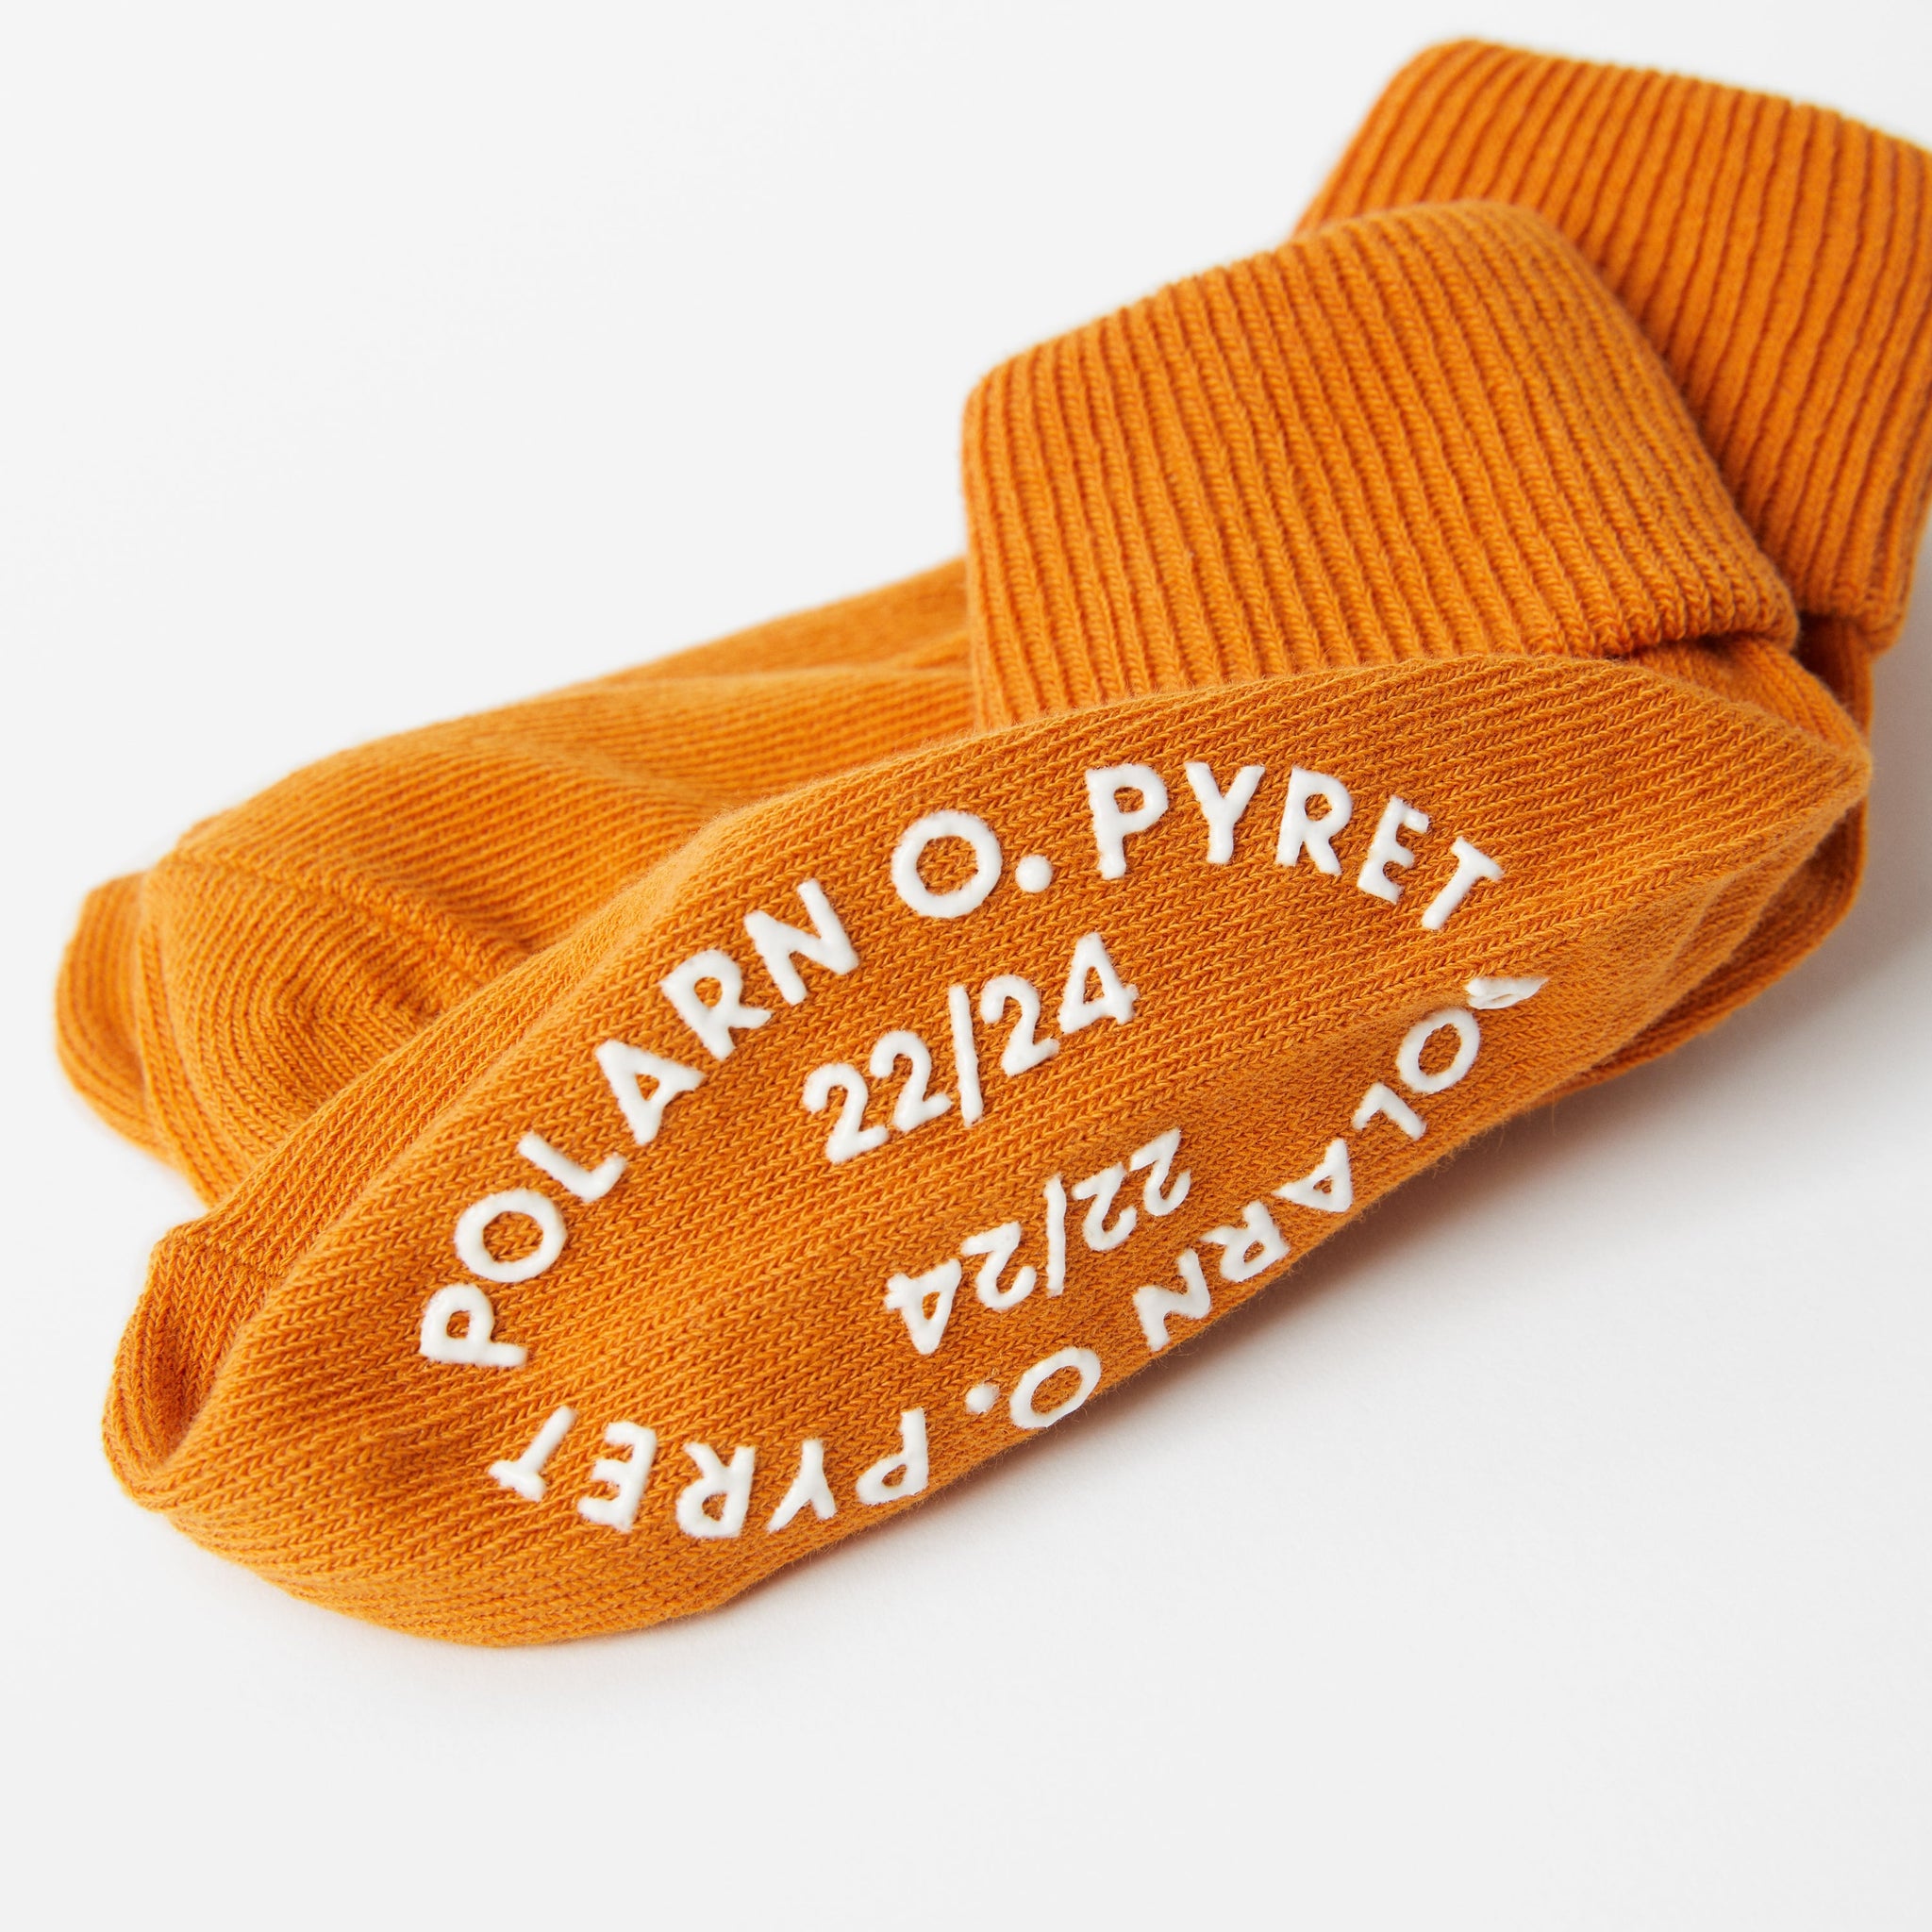 Yellow Antislip Kids Socks Multipack from the Polarn O. Pyret Kidswear collection. Ethically produced kids clothing.